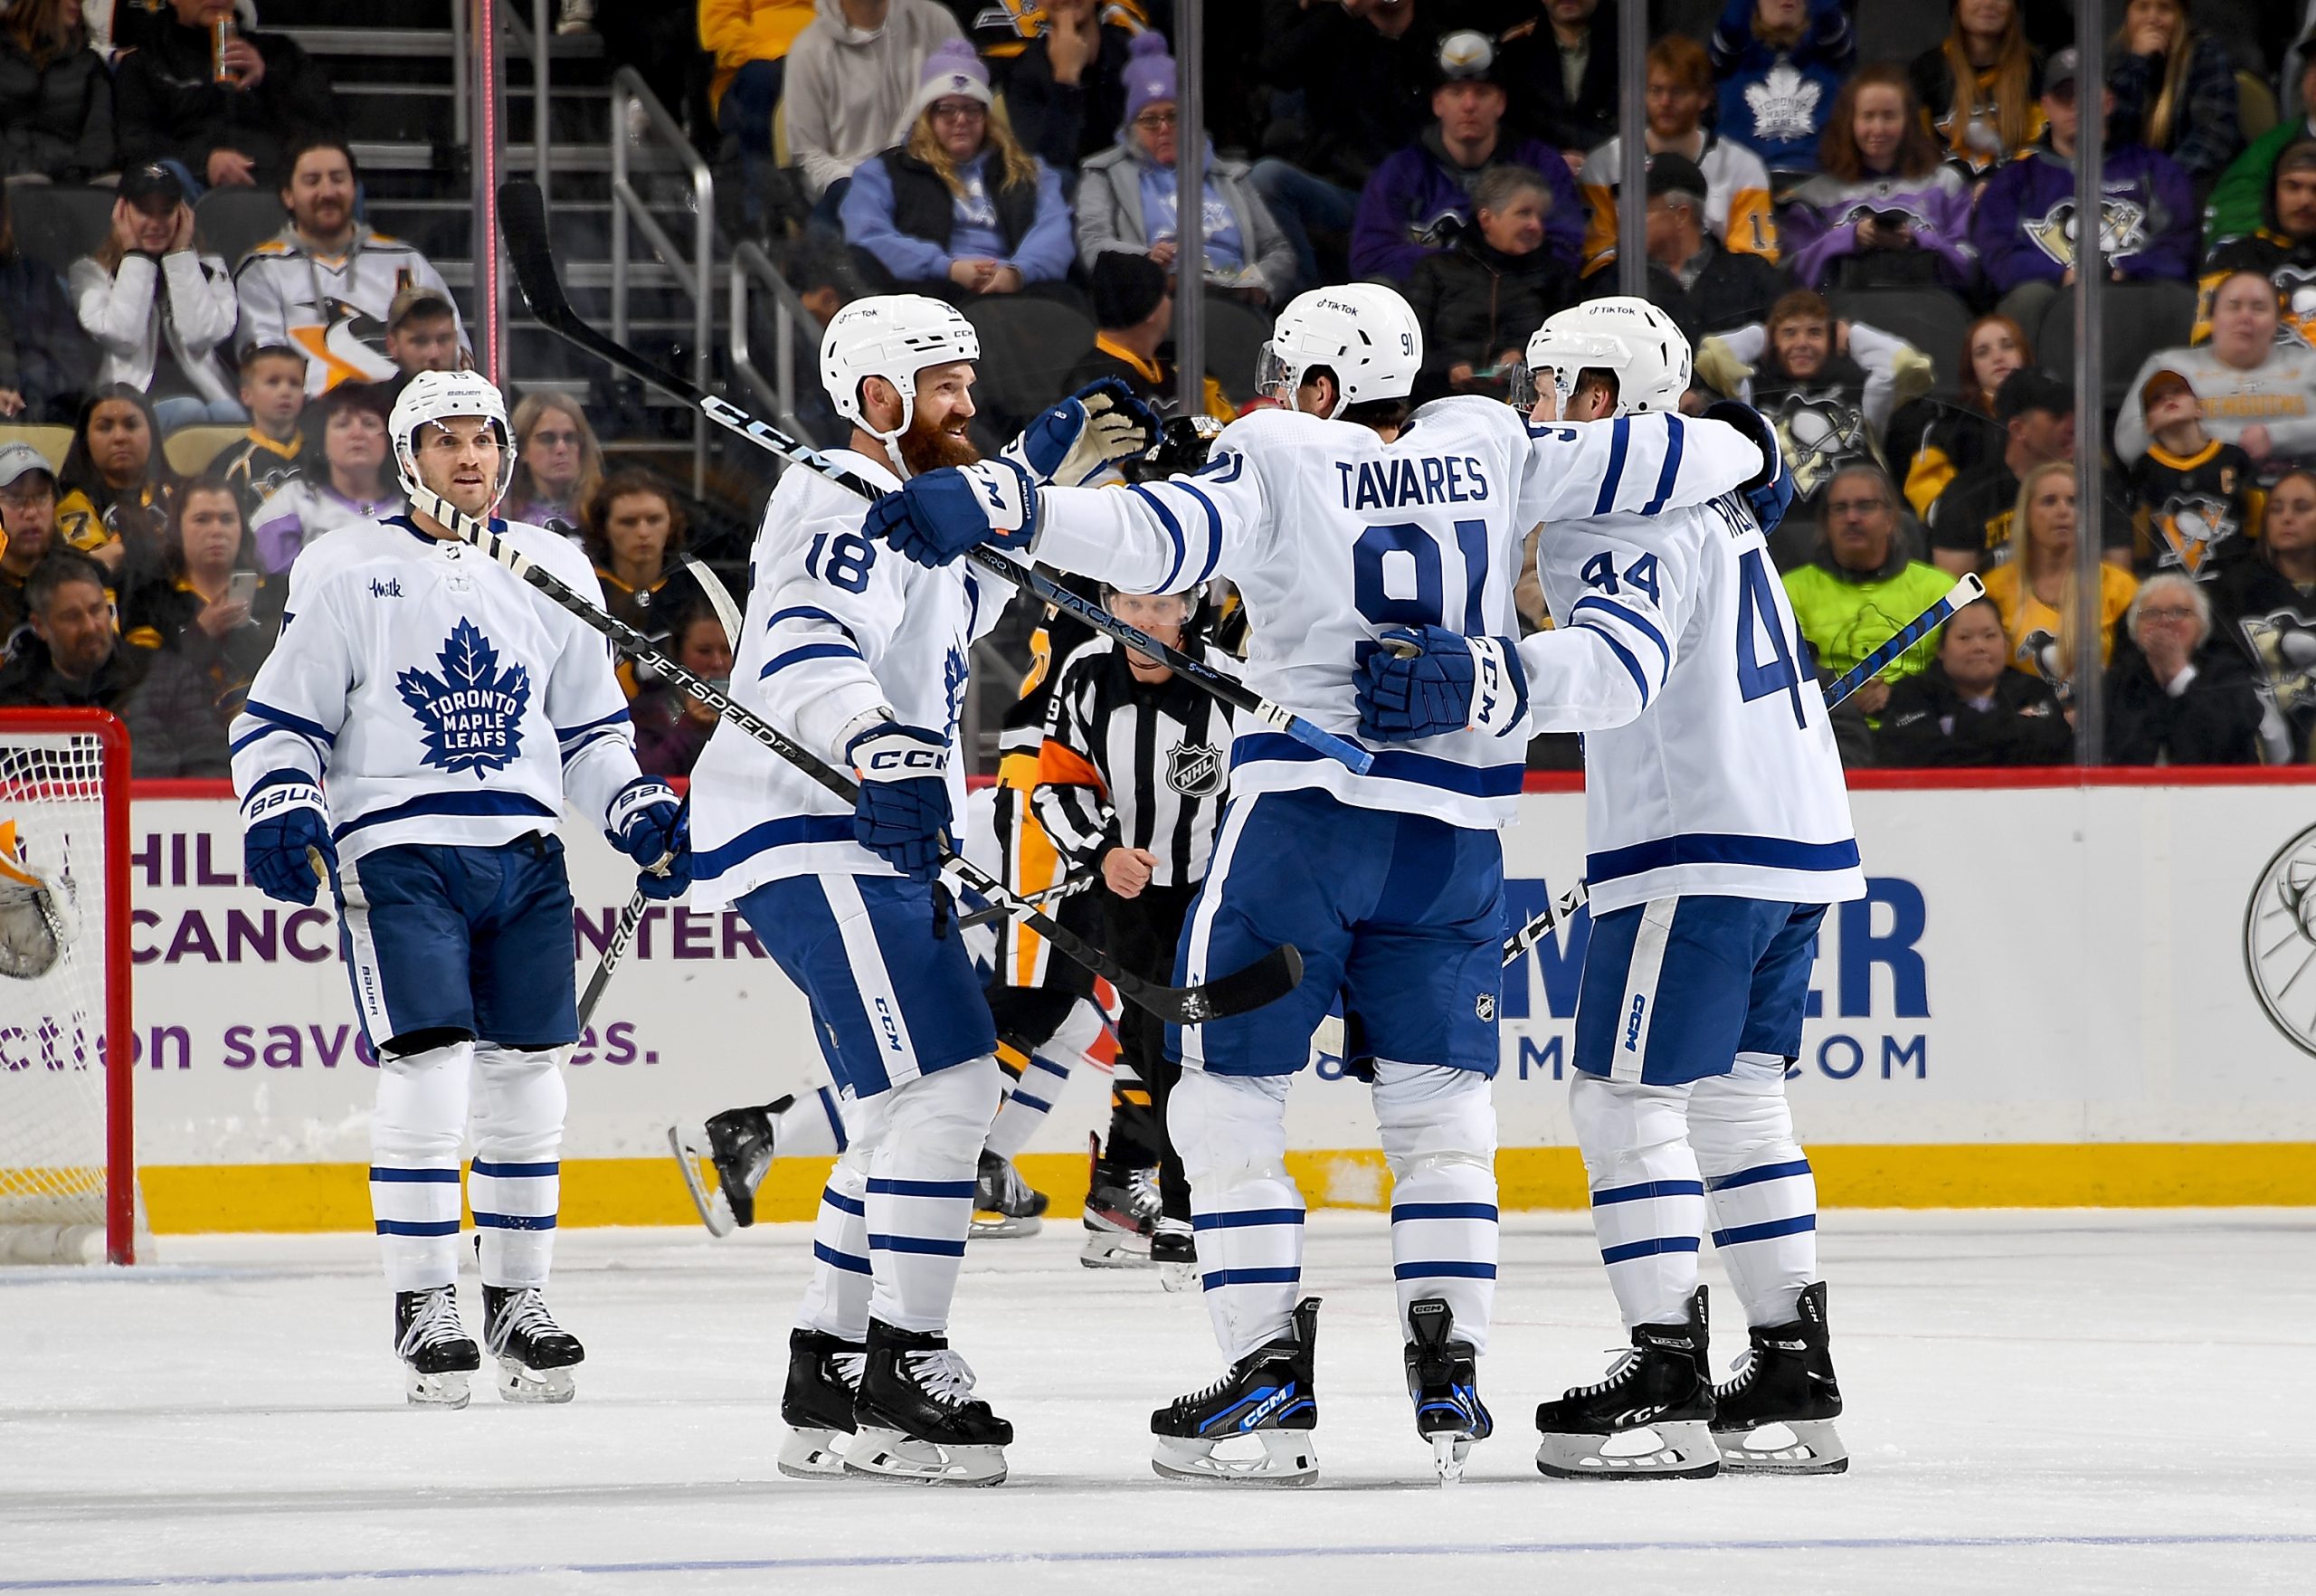 Toronto Maple Leafs celebrate after Tavares scores his 400th goal - NHL Predictions